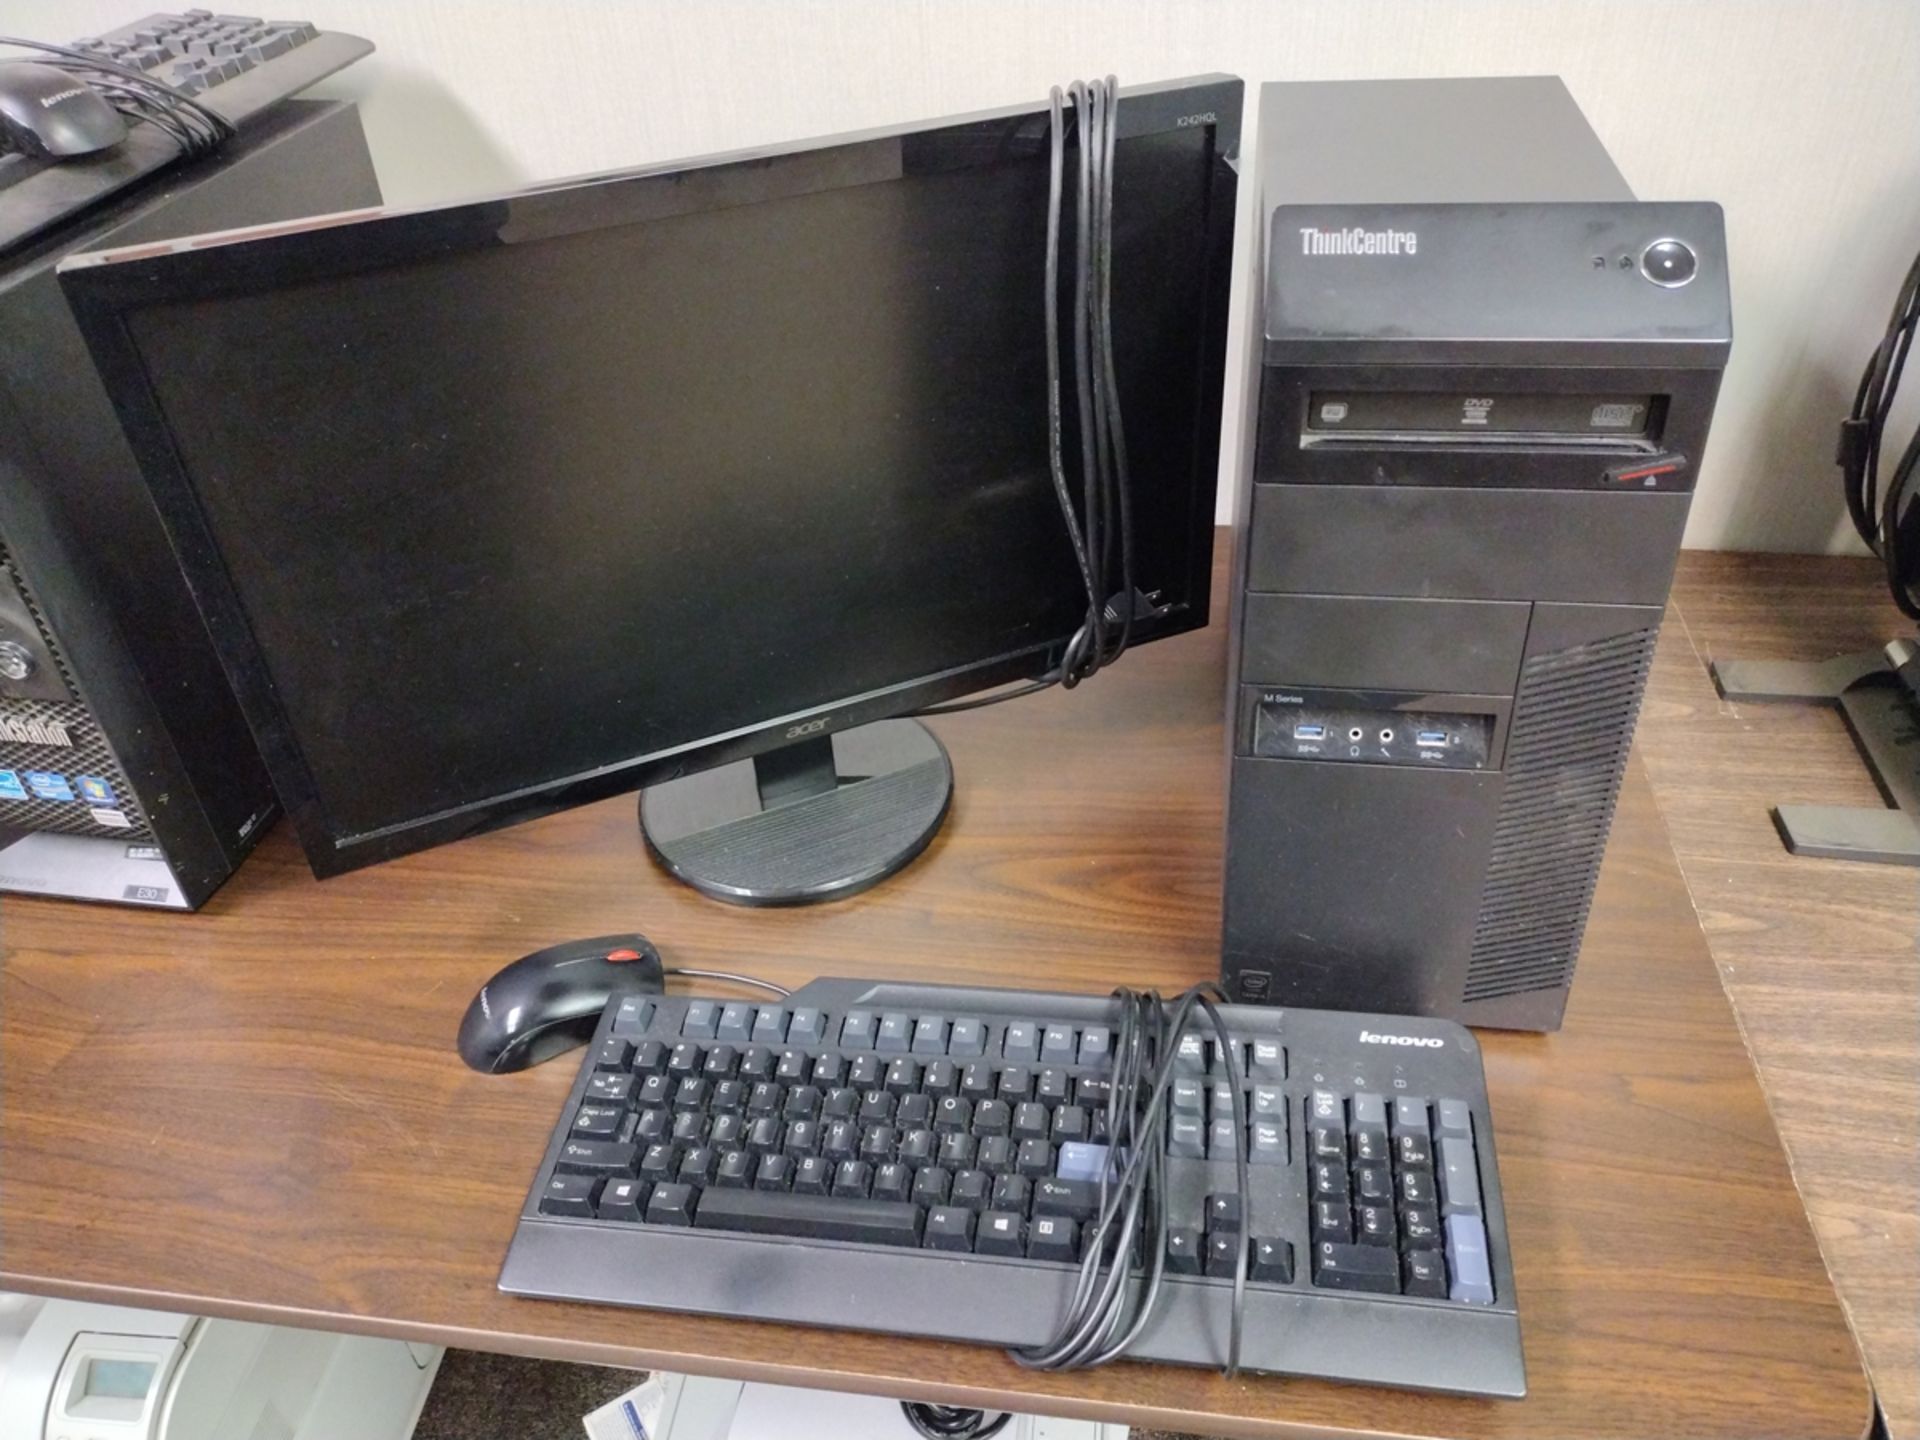 Lenovo M Series ThinkCentre i5 PC w/ Monitor and Keyboard